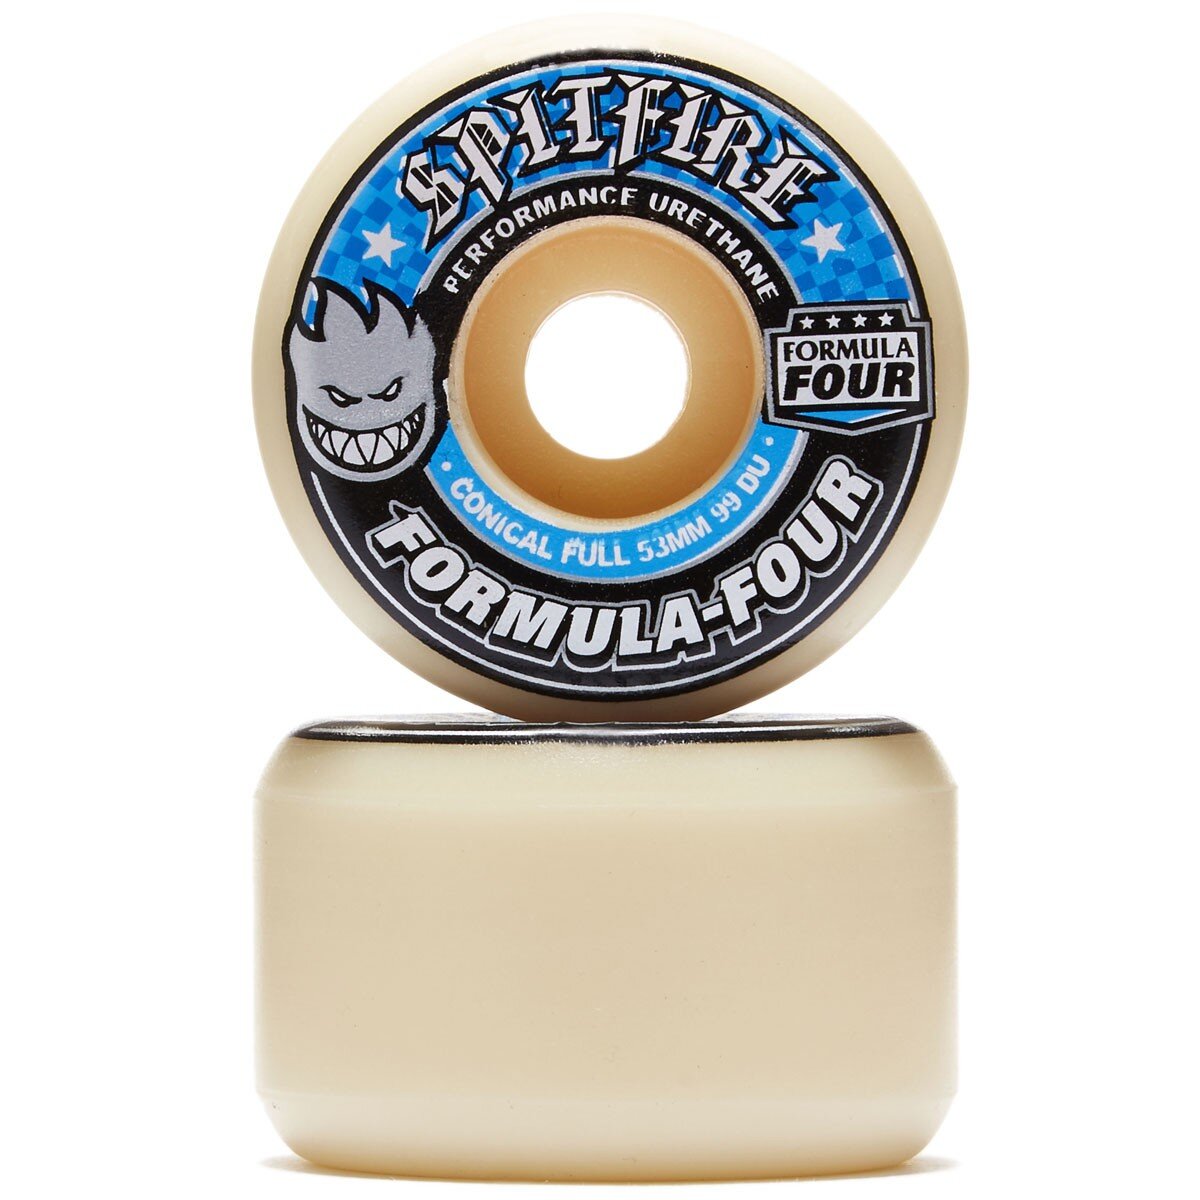 Spitfire Wheels "Conical Full- Formula Four 99A" Assorted Size Wheel